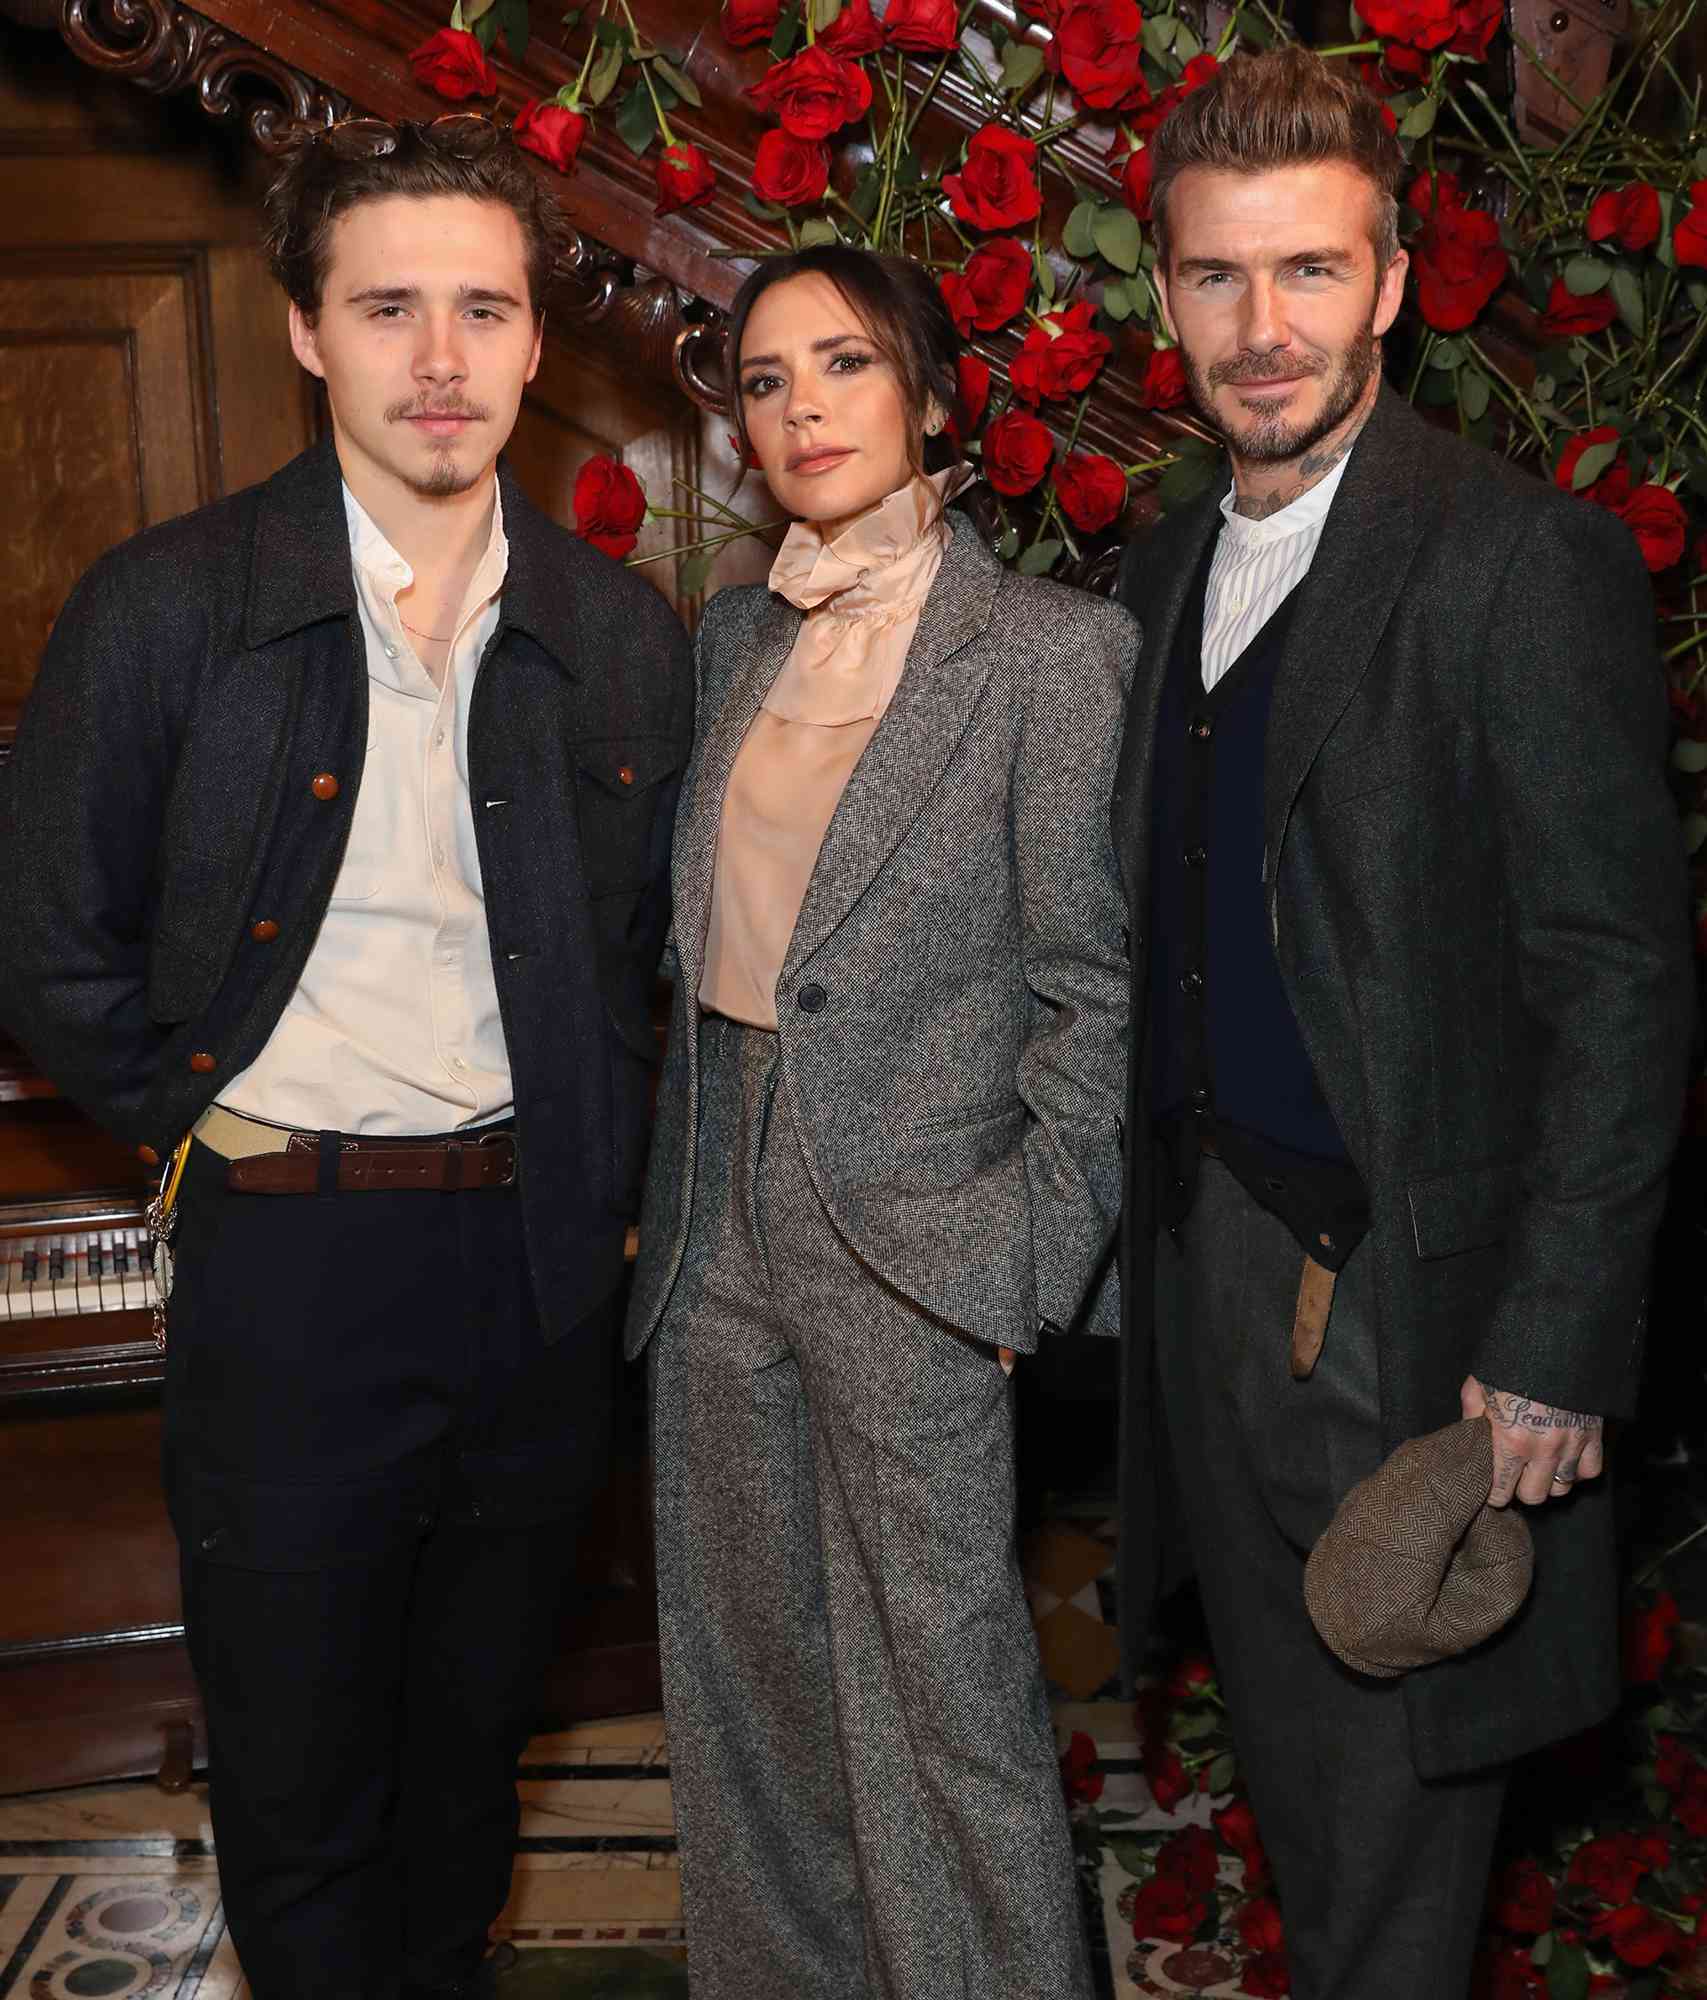 Brooklyn, Victoria and David Beckham attend the Kent & Curwen presentation during London Fashion Week Men's January 2019 at Two Temple Place on January 6, 2019 in London, England